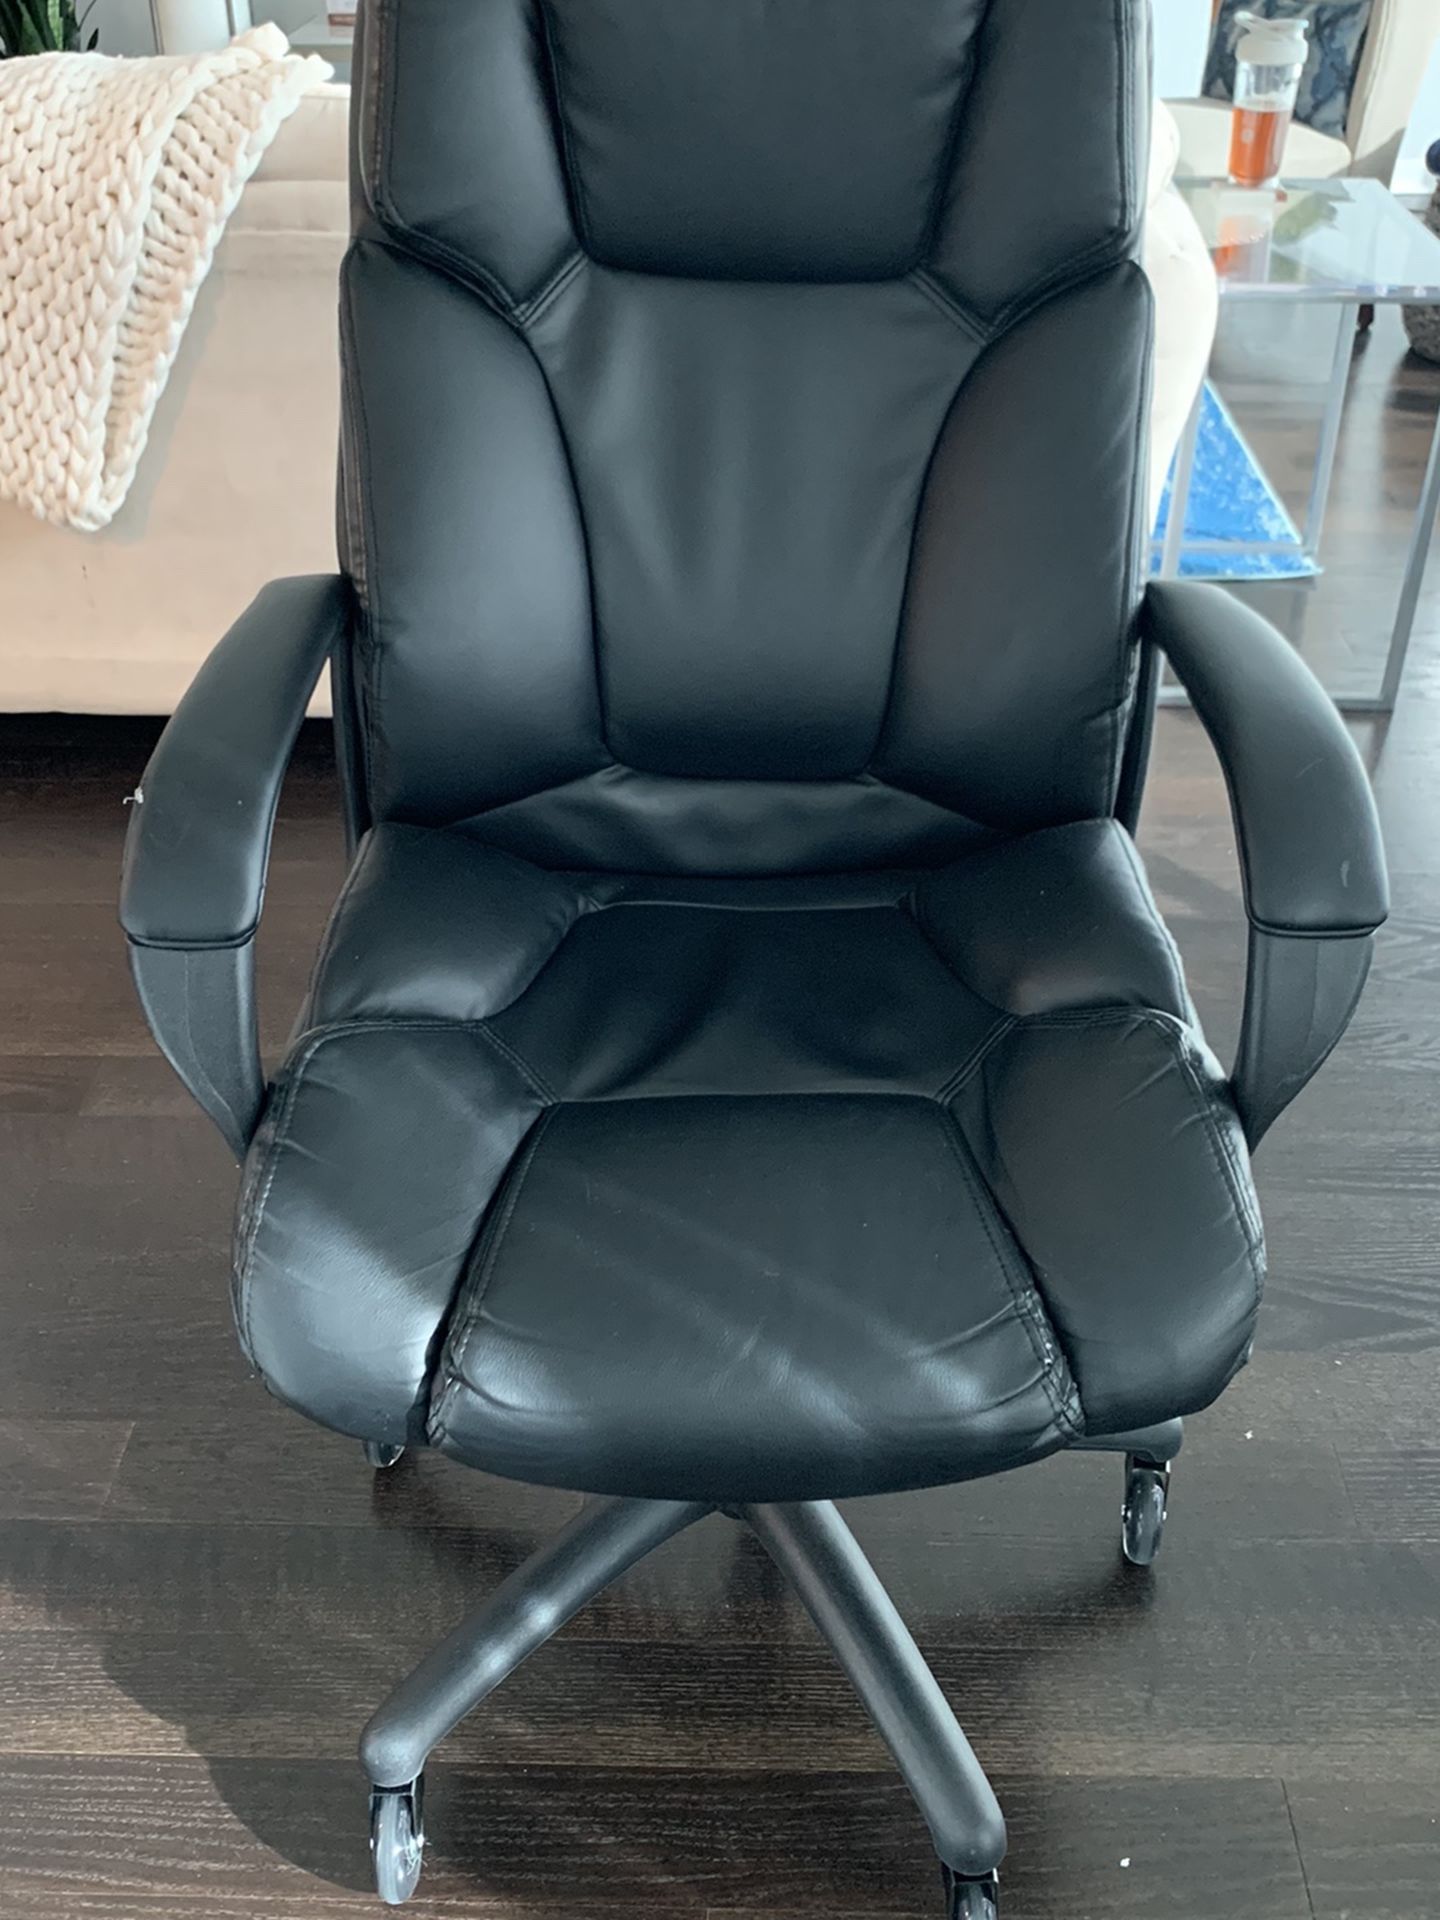 High-back Office Chair